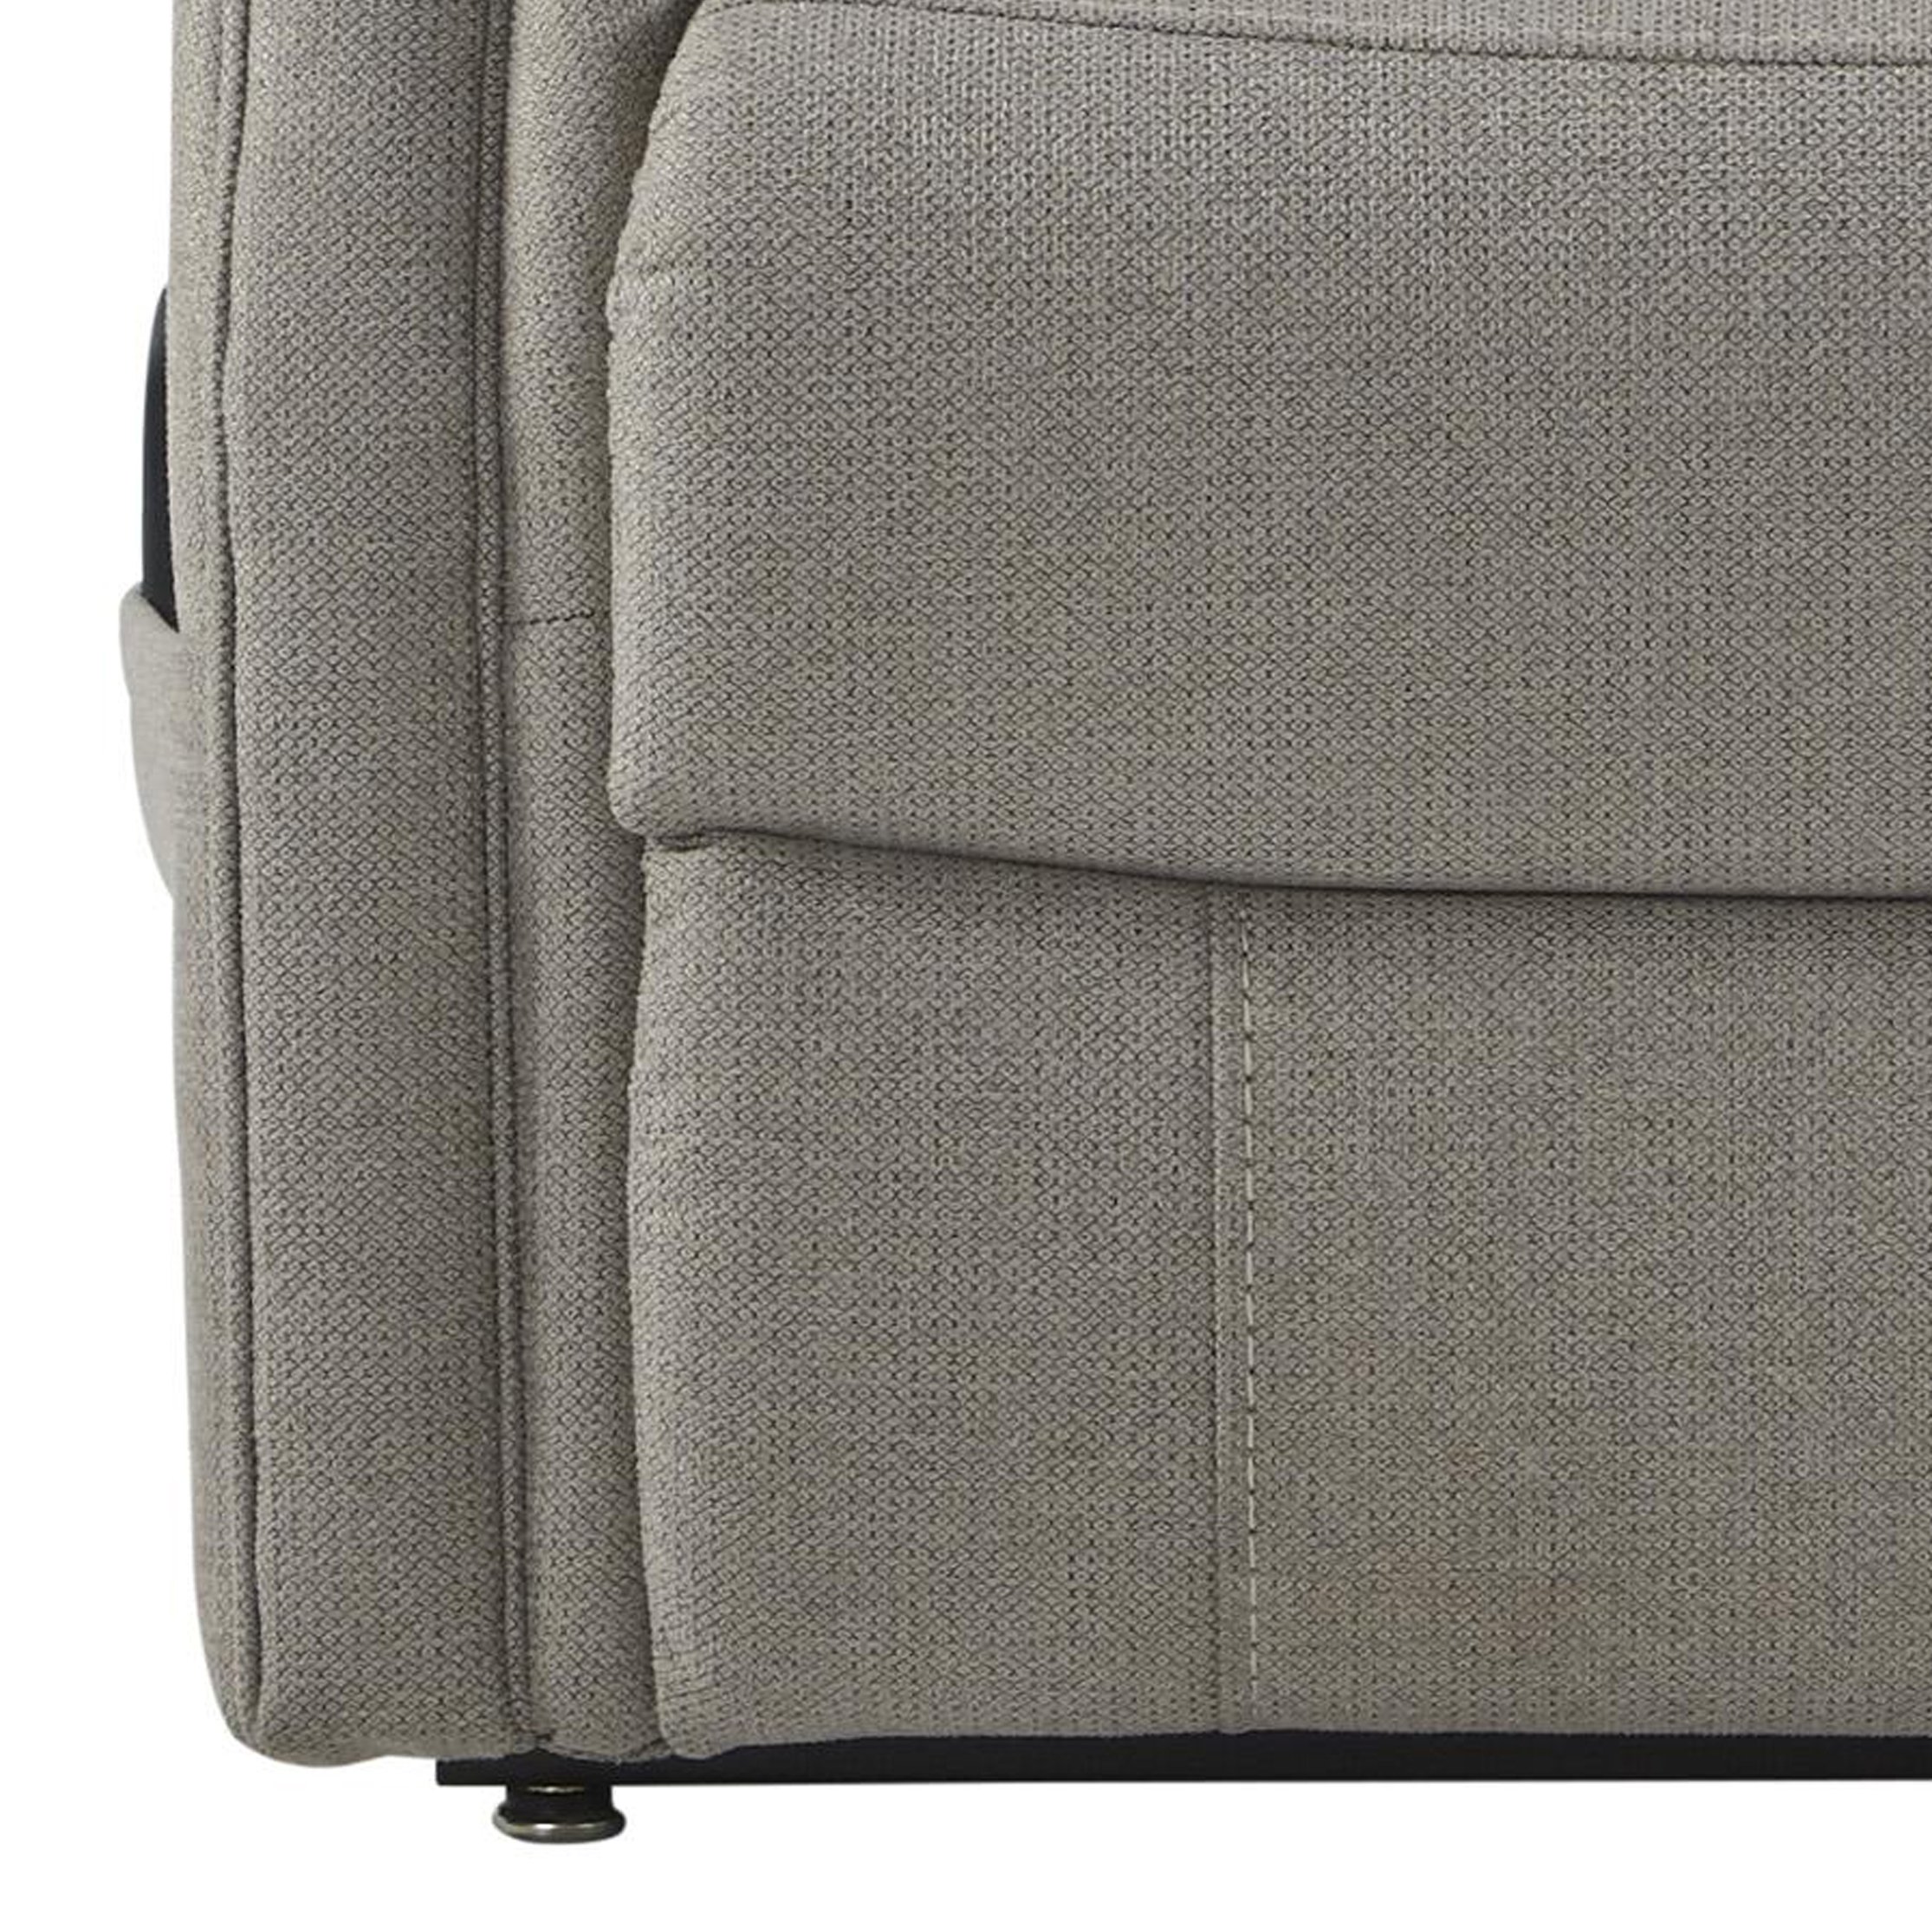 Fabric Upholstered Metal Frame Power Lift Recliner With Tufted Back, Gray- Saltoro Sherpi